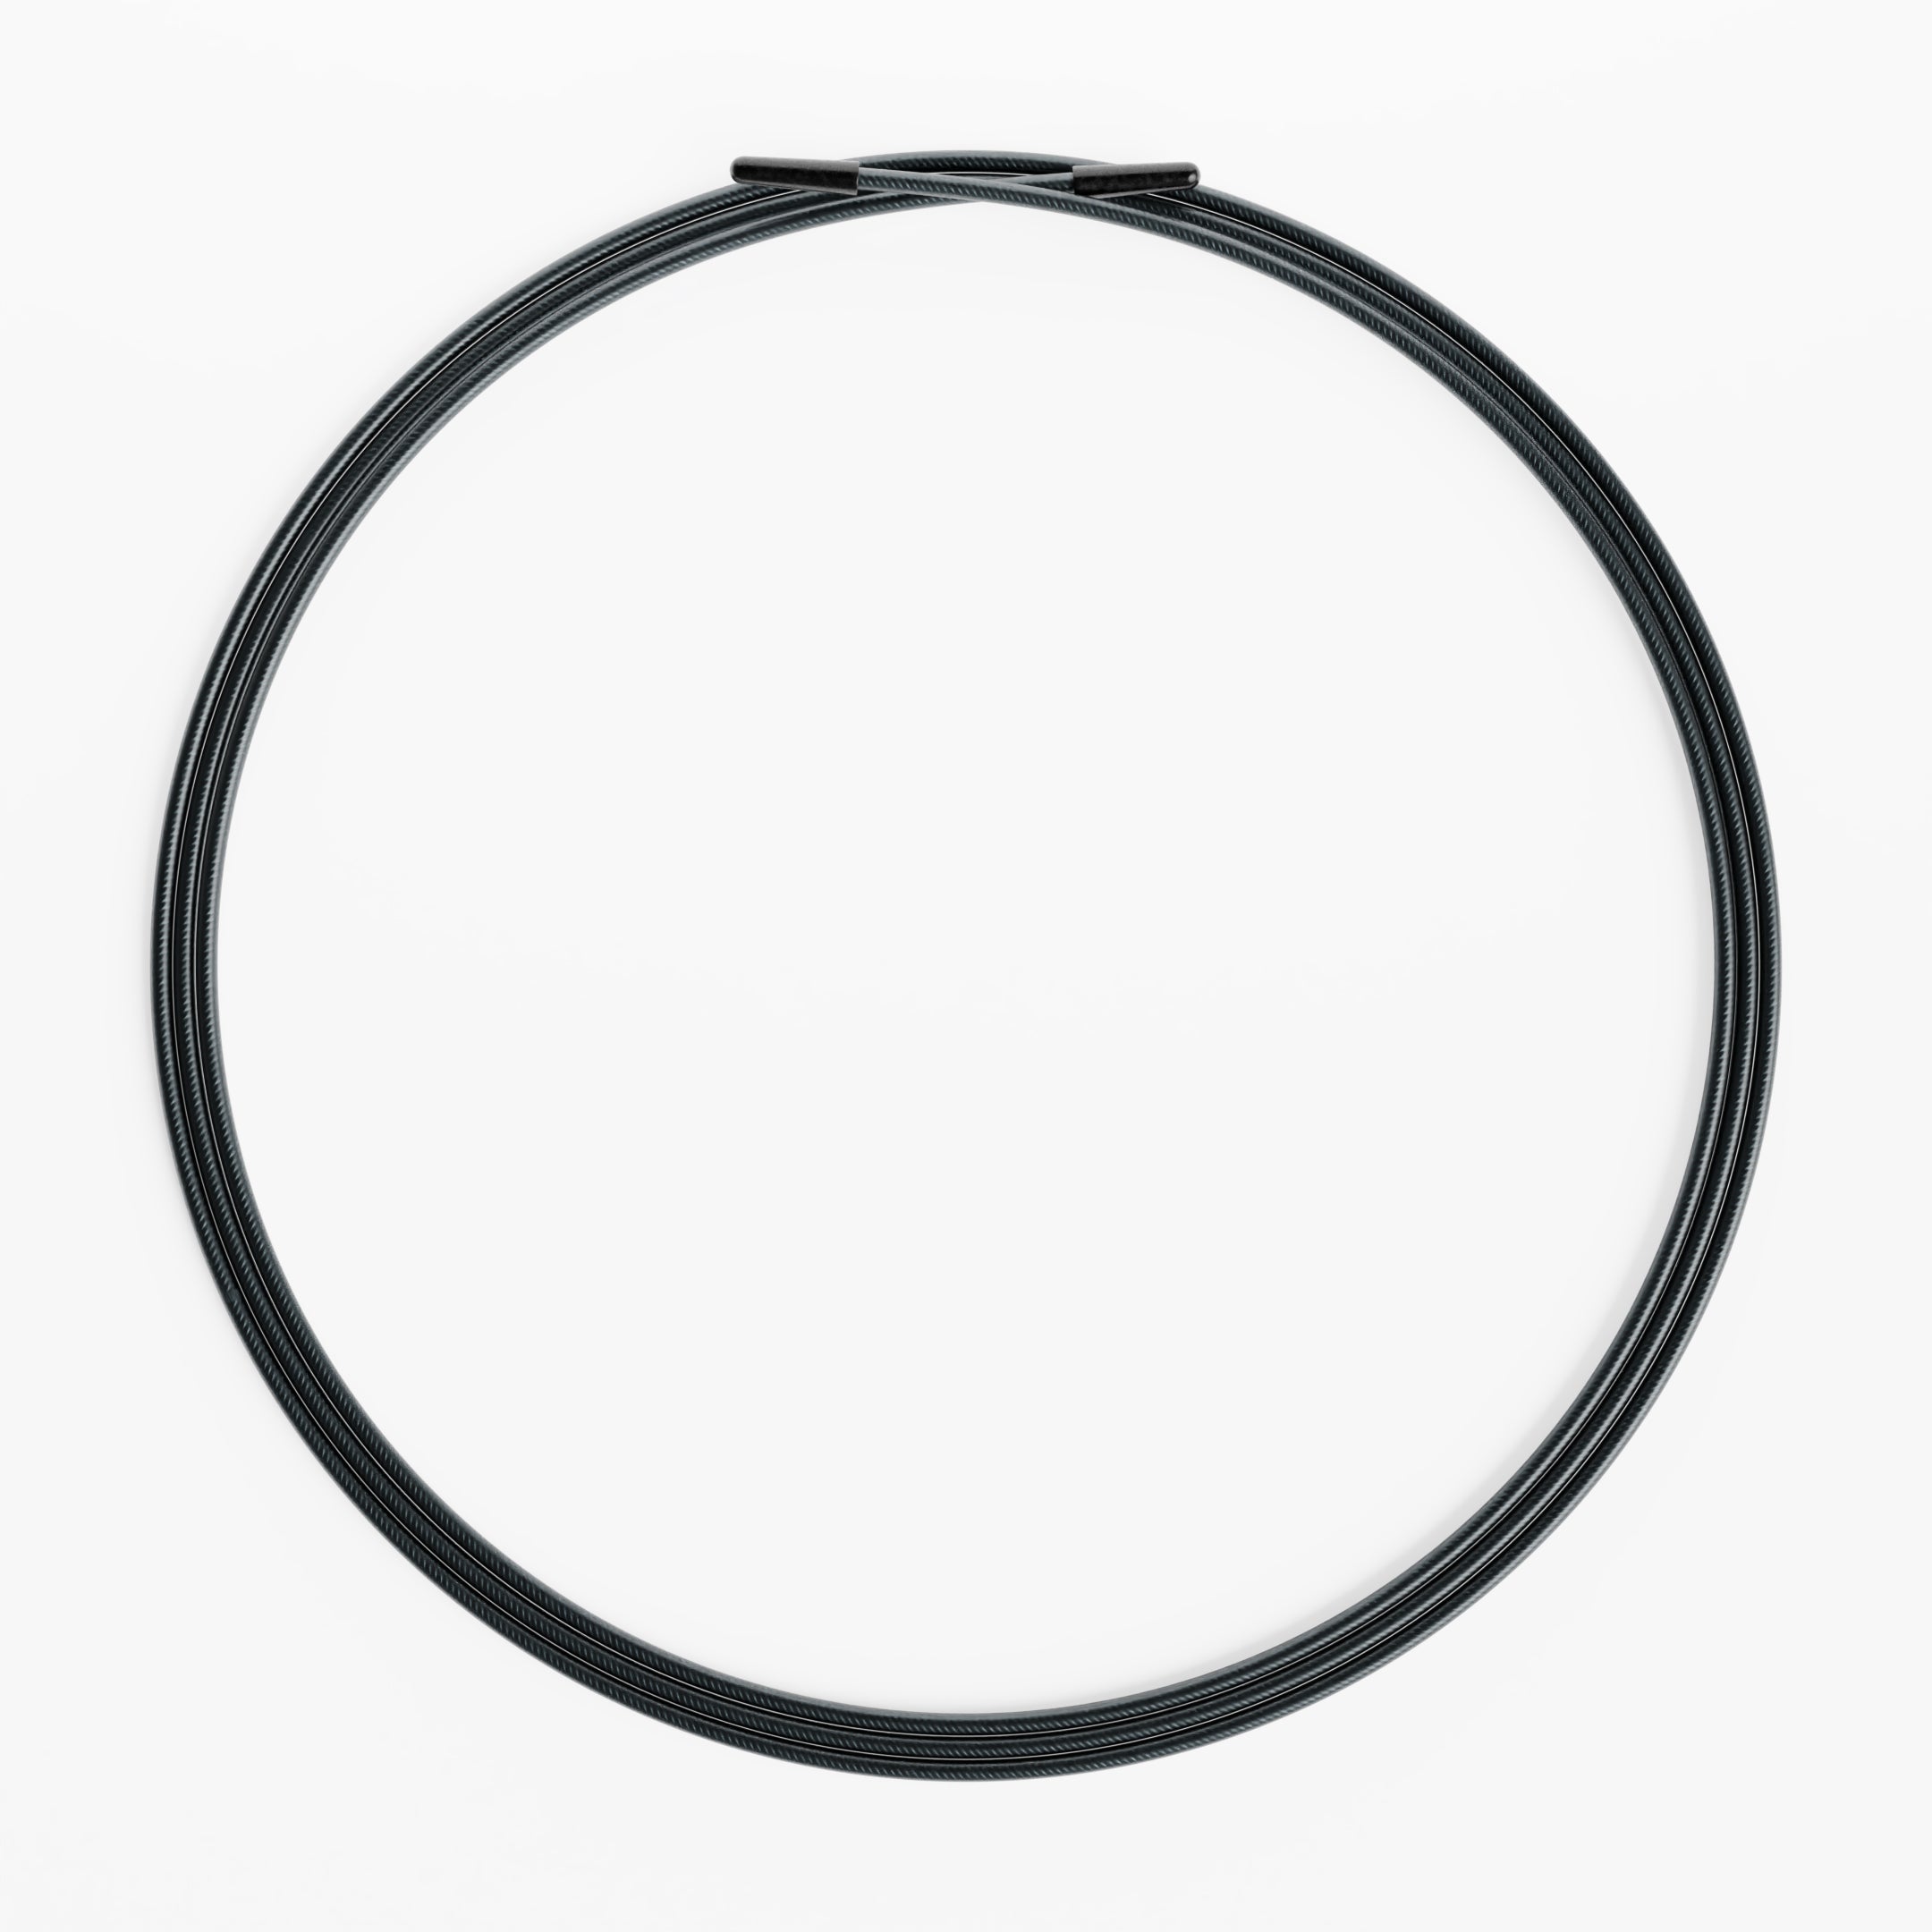 2.0 mm pvc coated spare wire